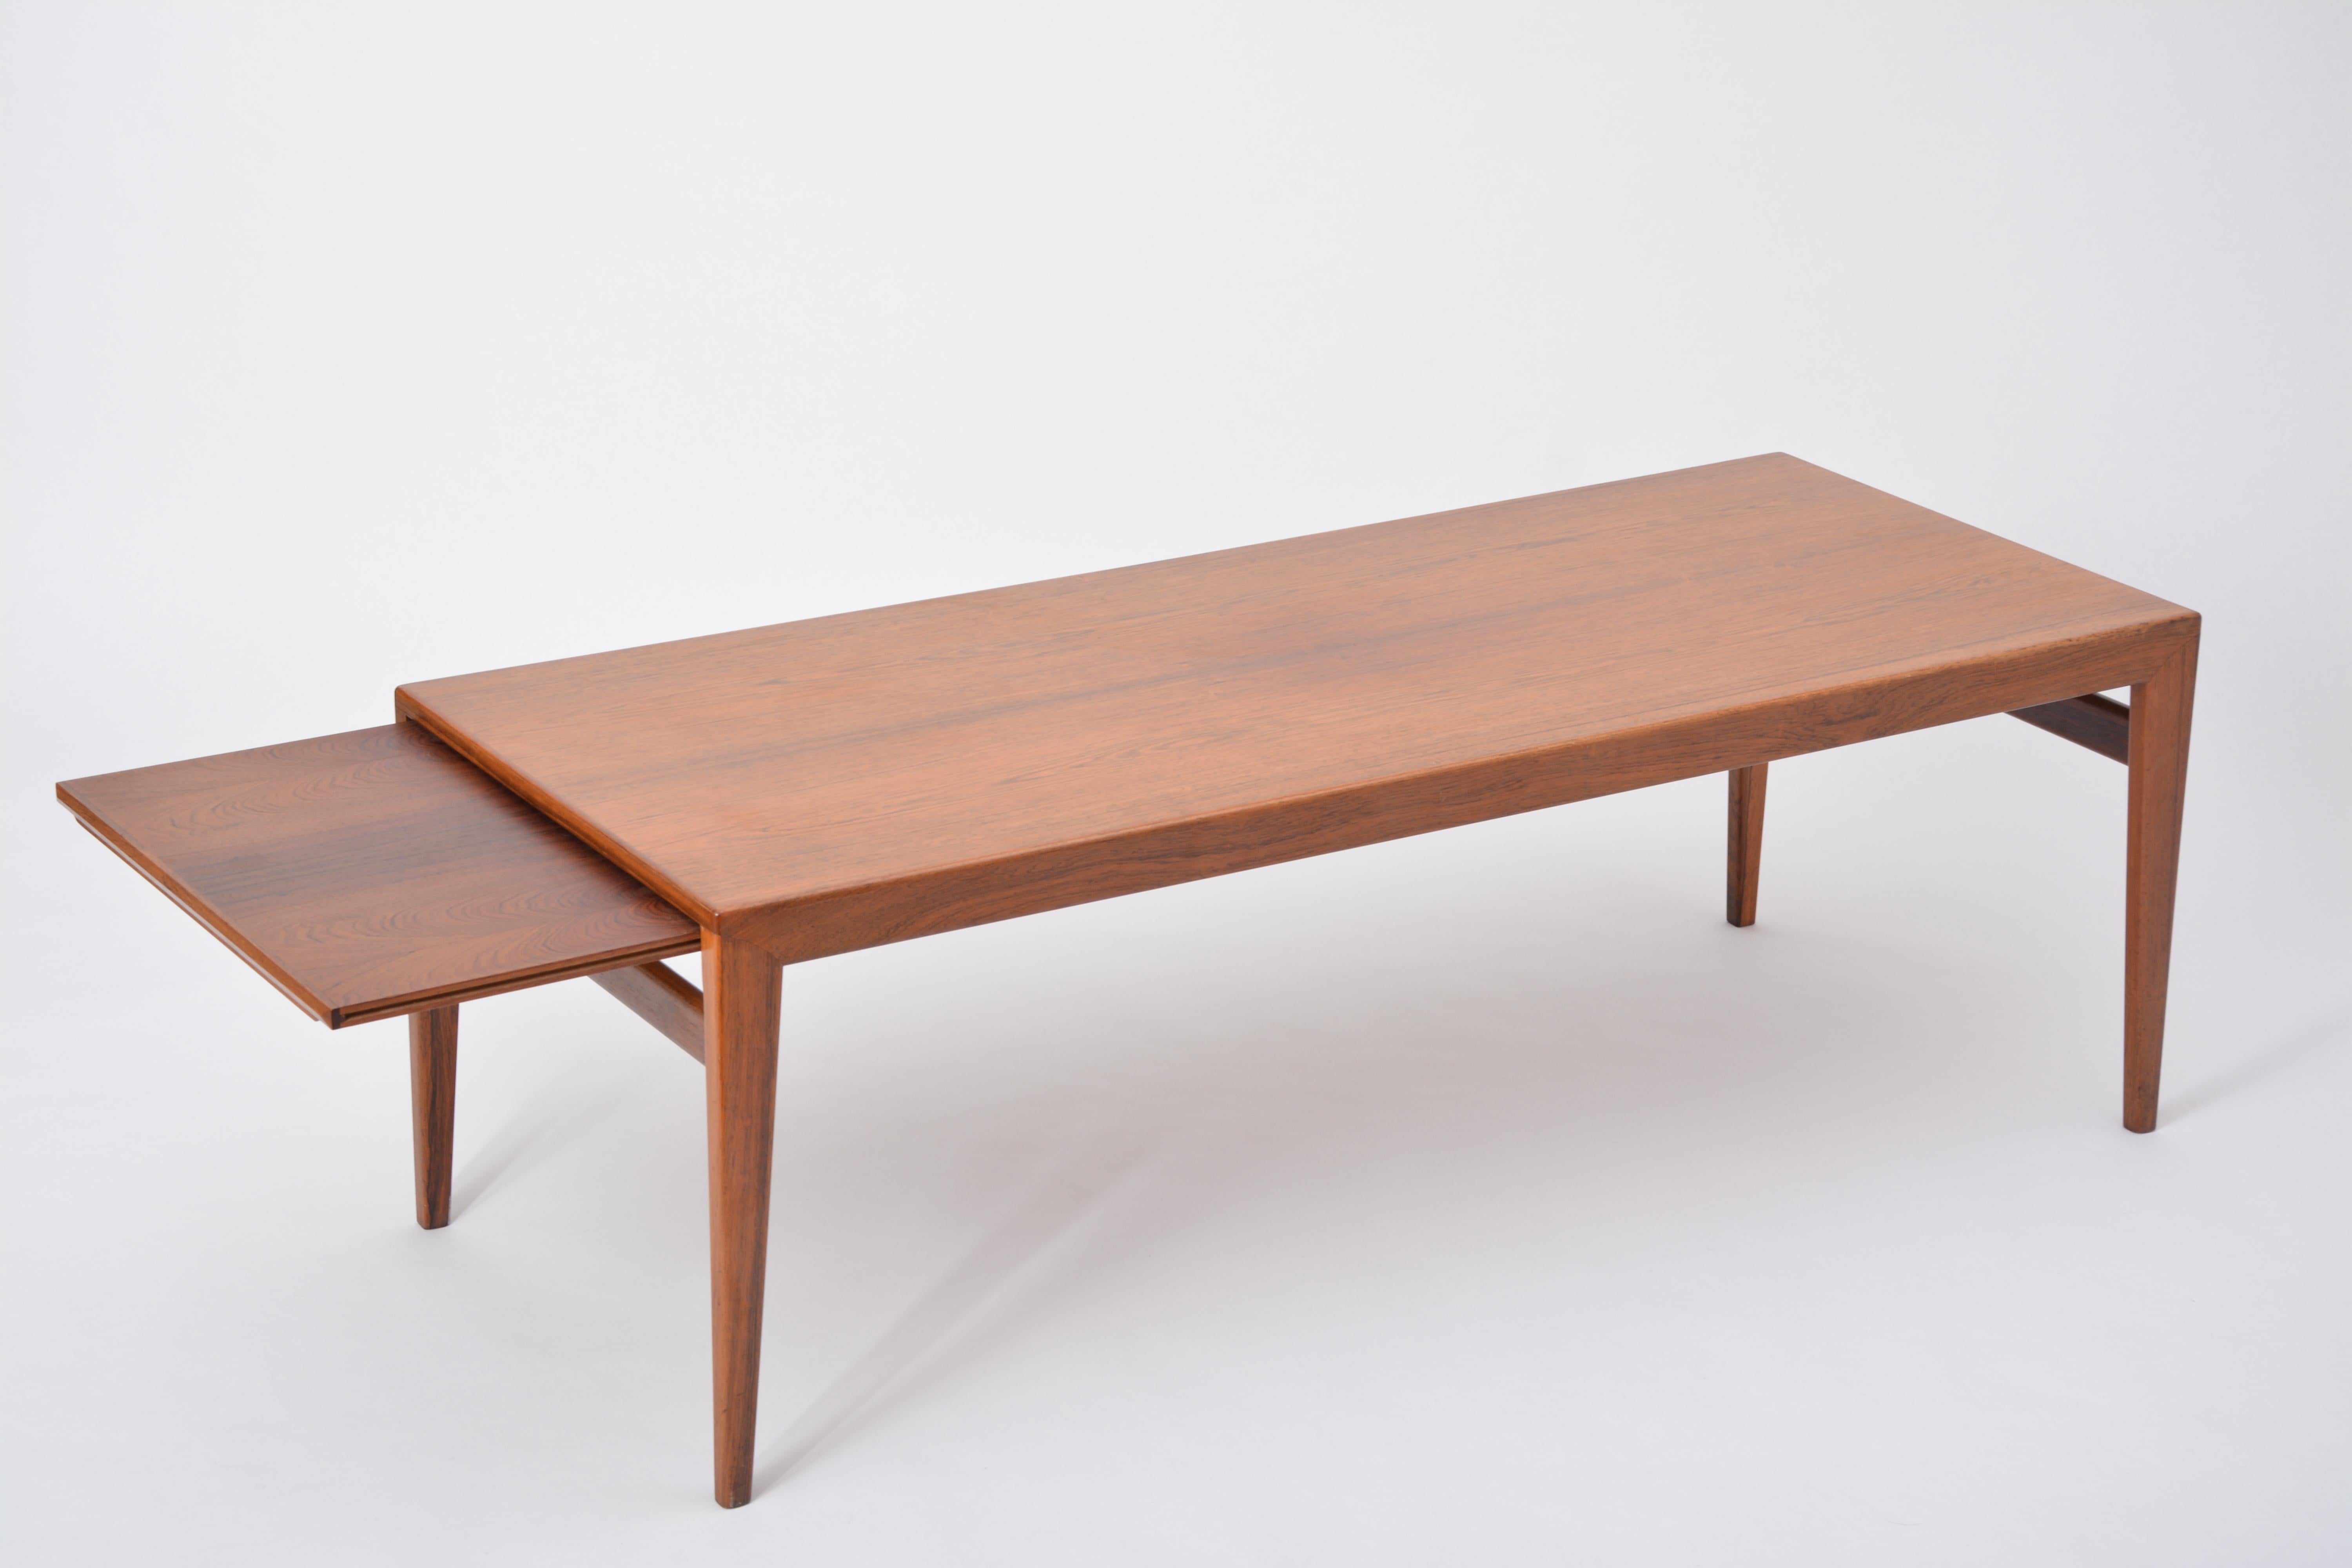 Extendable Danish Mid-Century Modern coffee table by Johannes Andersen

This coffee table is made of wood and features two extensions. One of the extension features a formica top. It was designed by Johannes Andersen in the 1960s and produced by